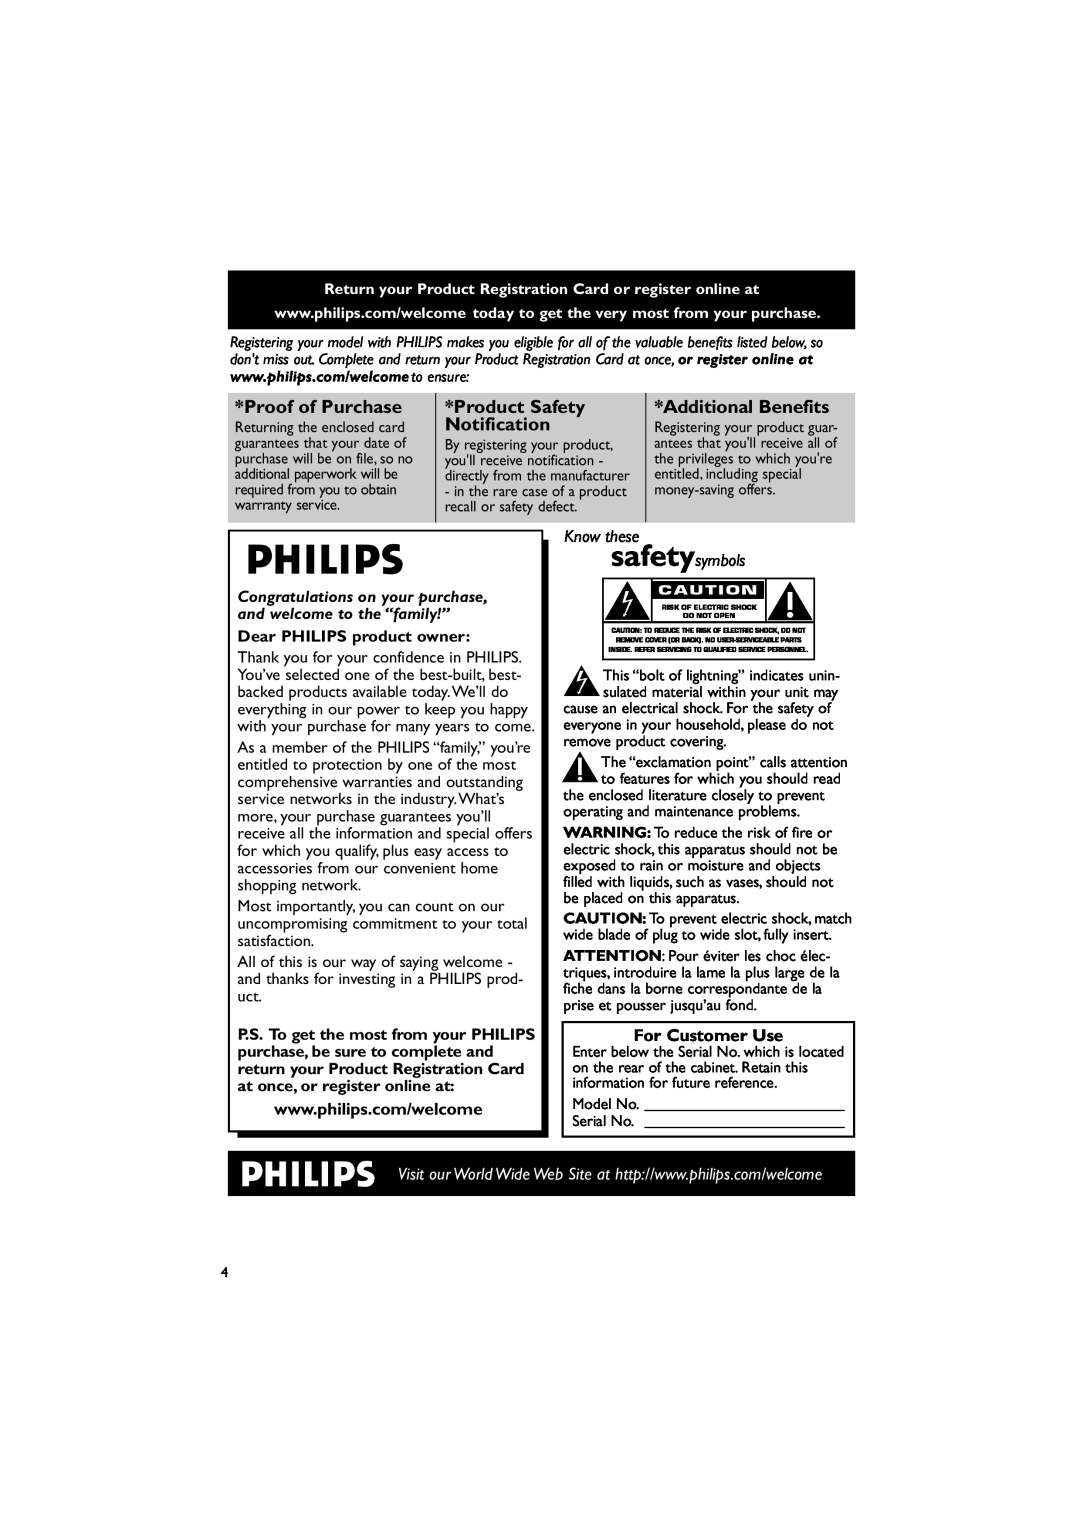 Philips FWM143/37 quick start For Customer Use, Proof of Purchase, Product Safety, Additional Benefits, Notification 